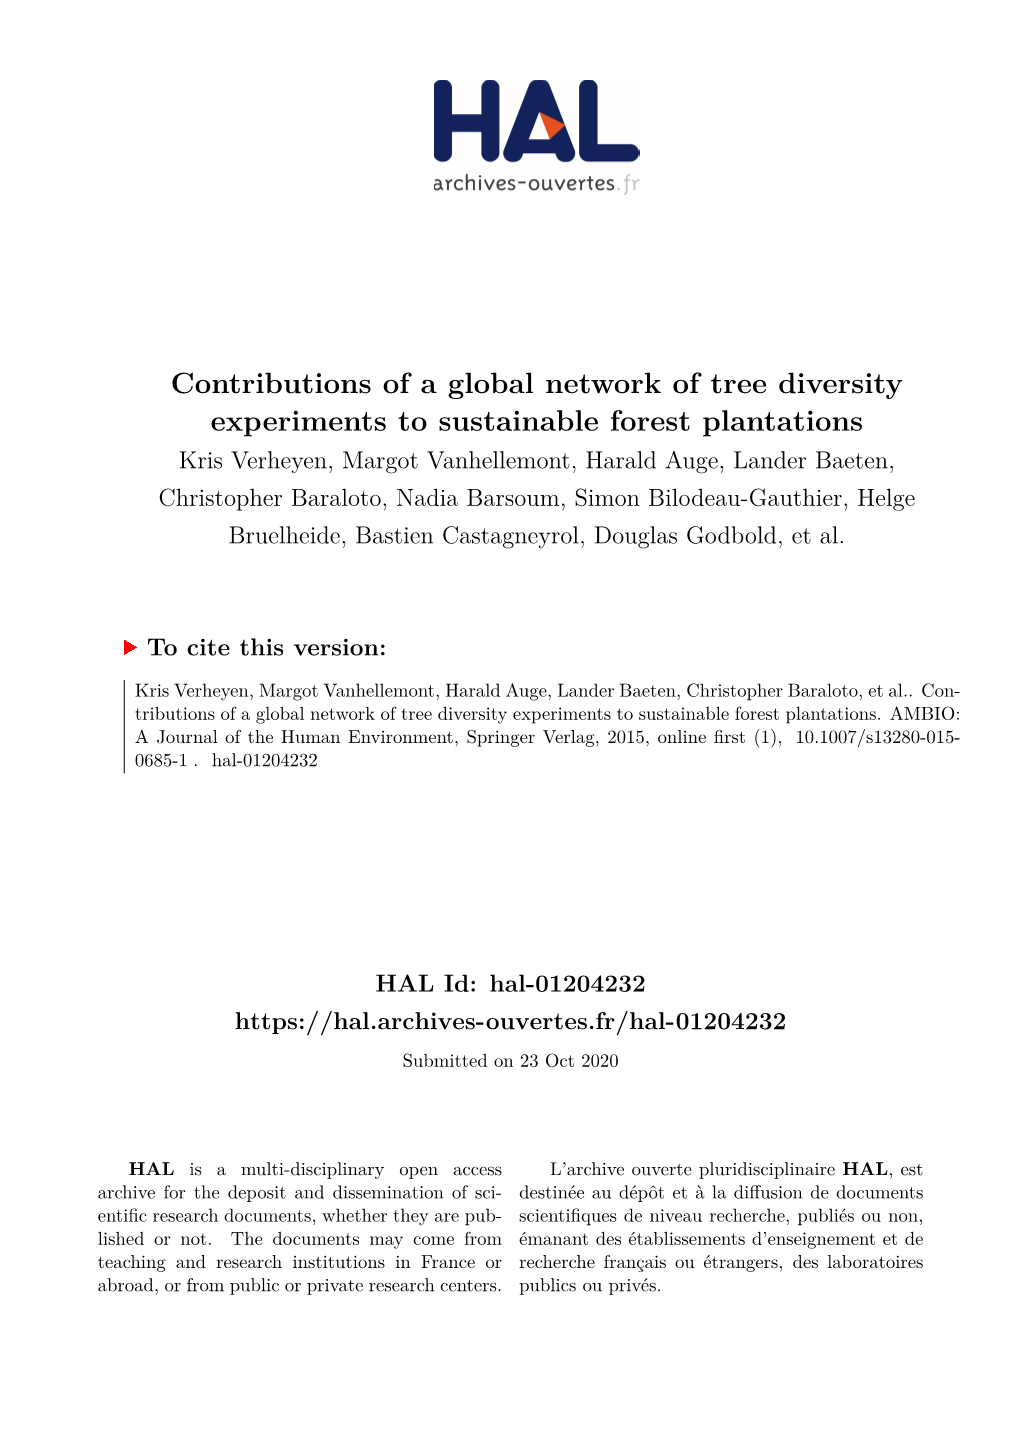 Contributions of a Global Network of Tree Diversity Experiments To